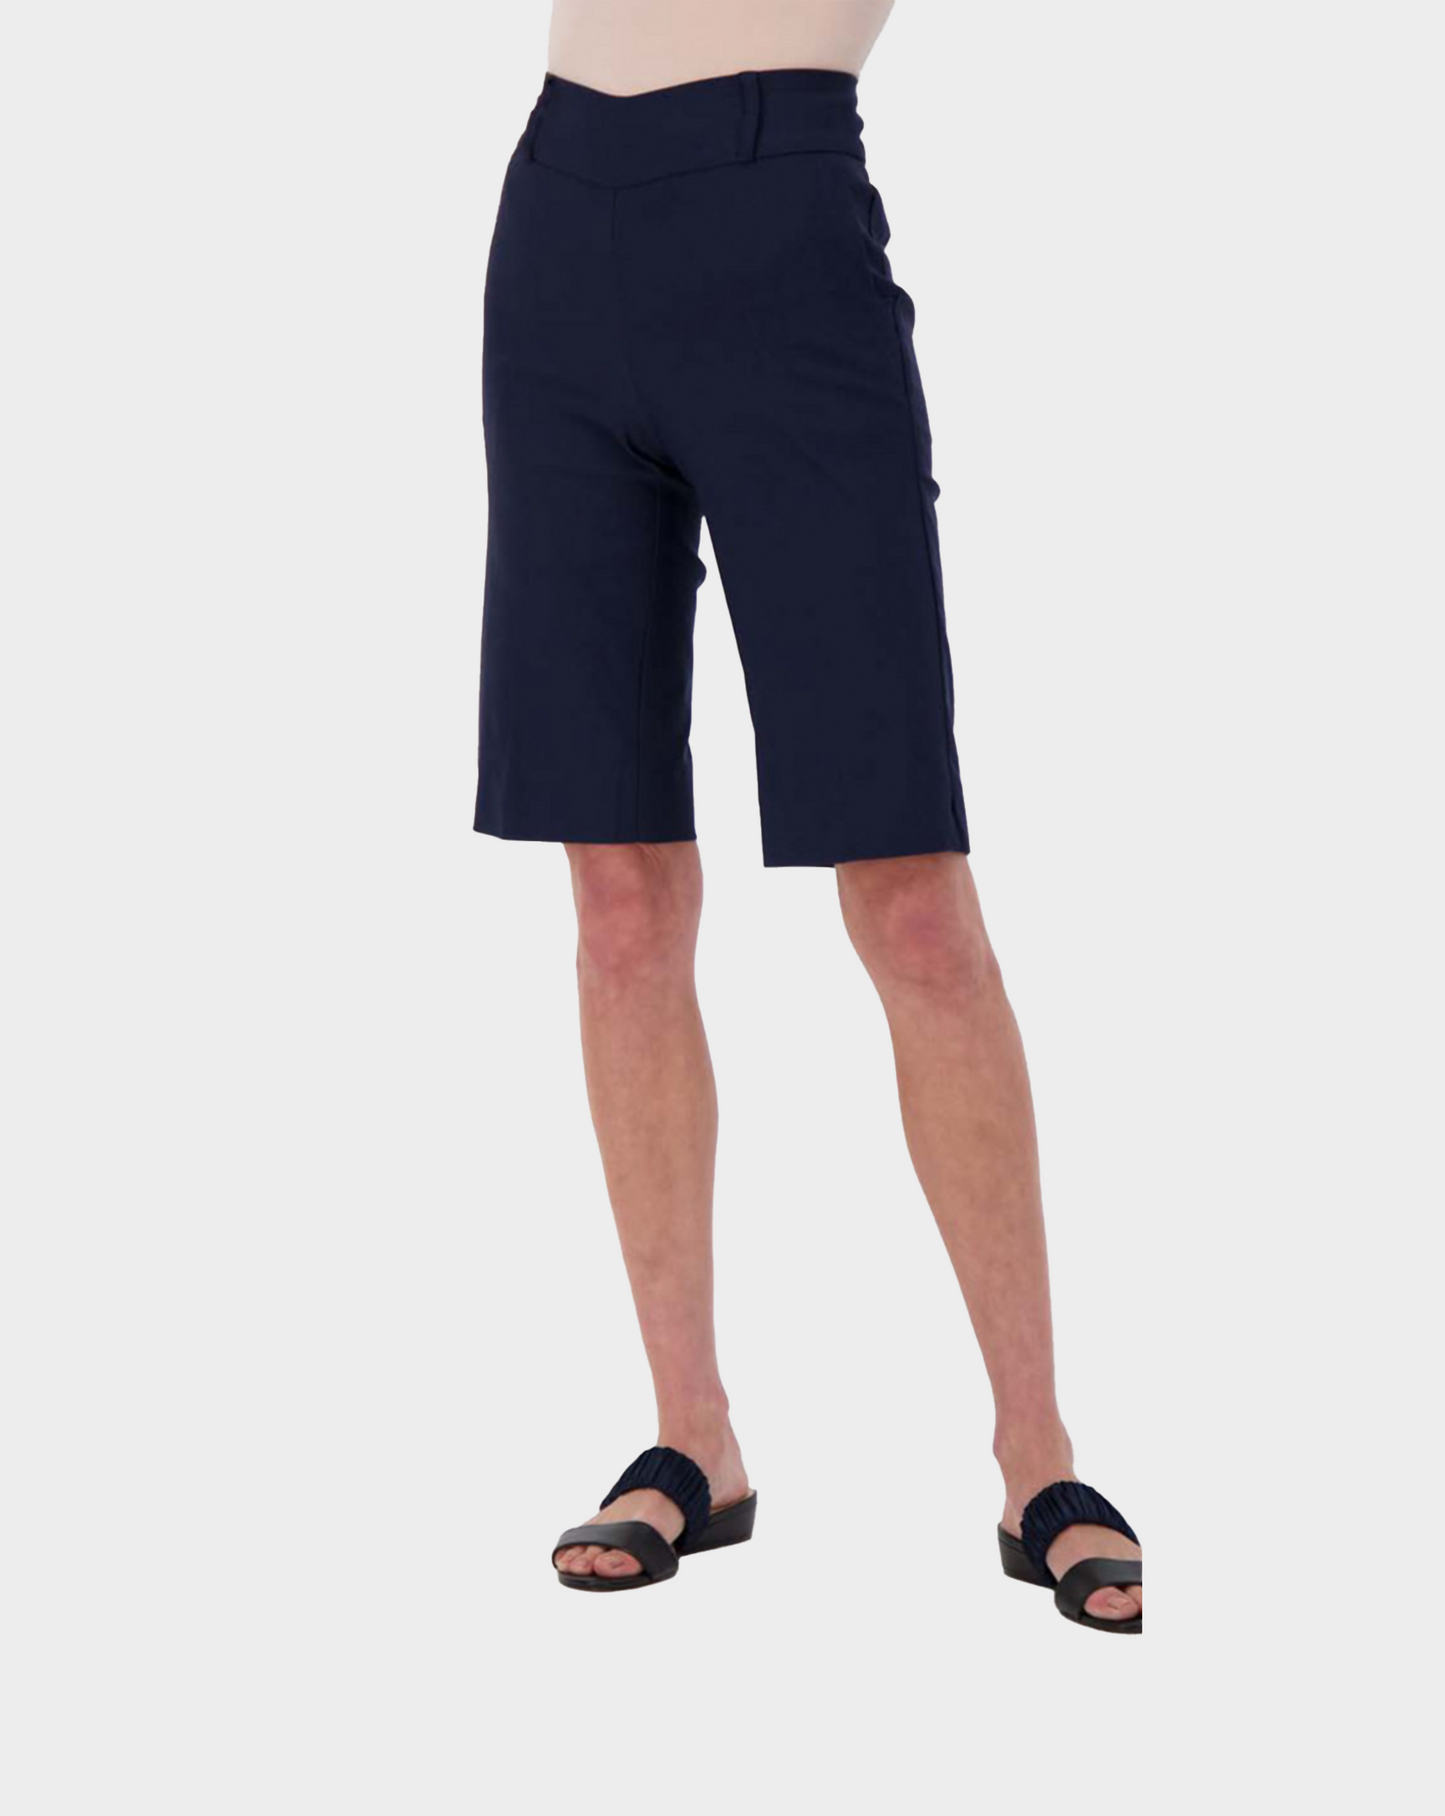 The Pull On Tummy Control Short With Pockets